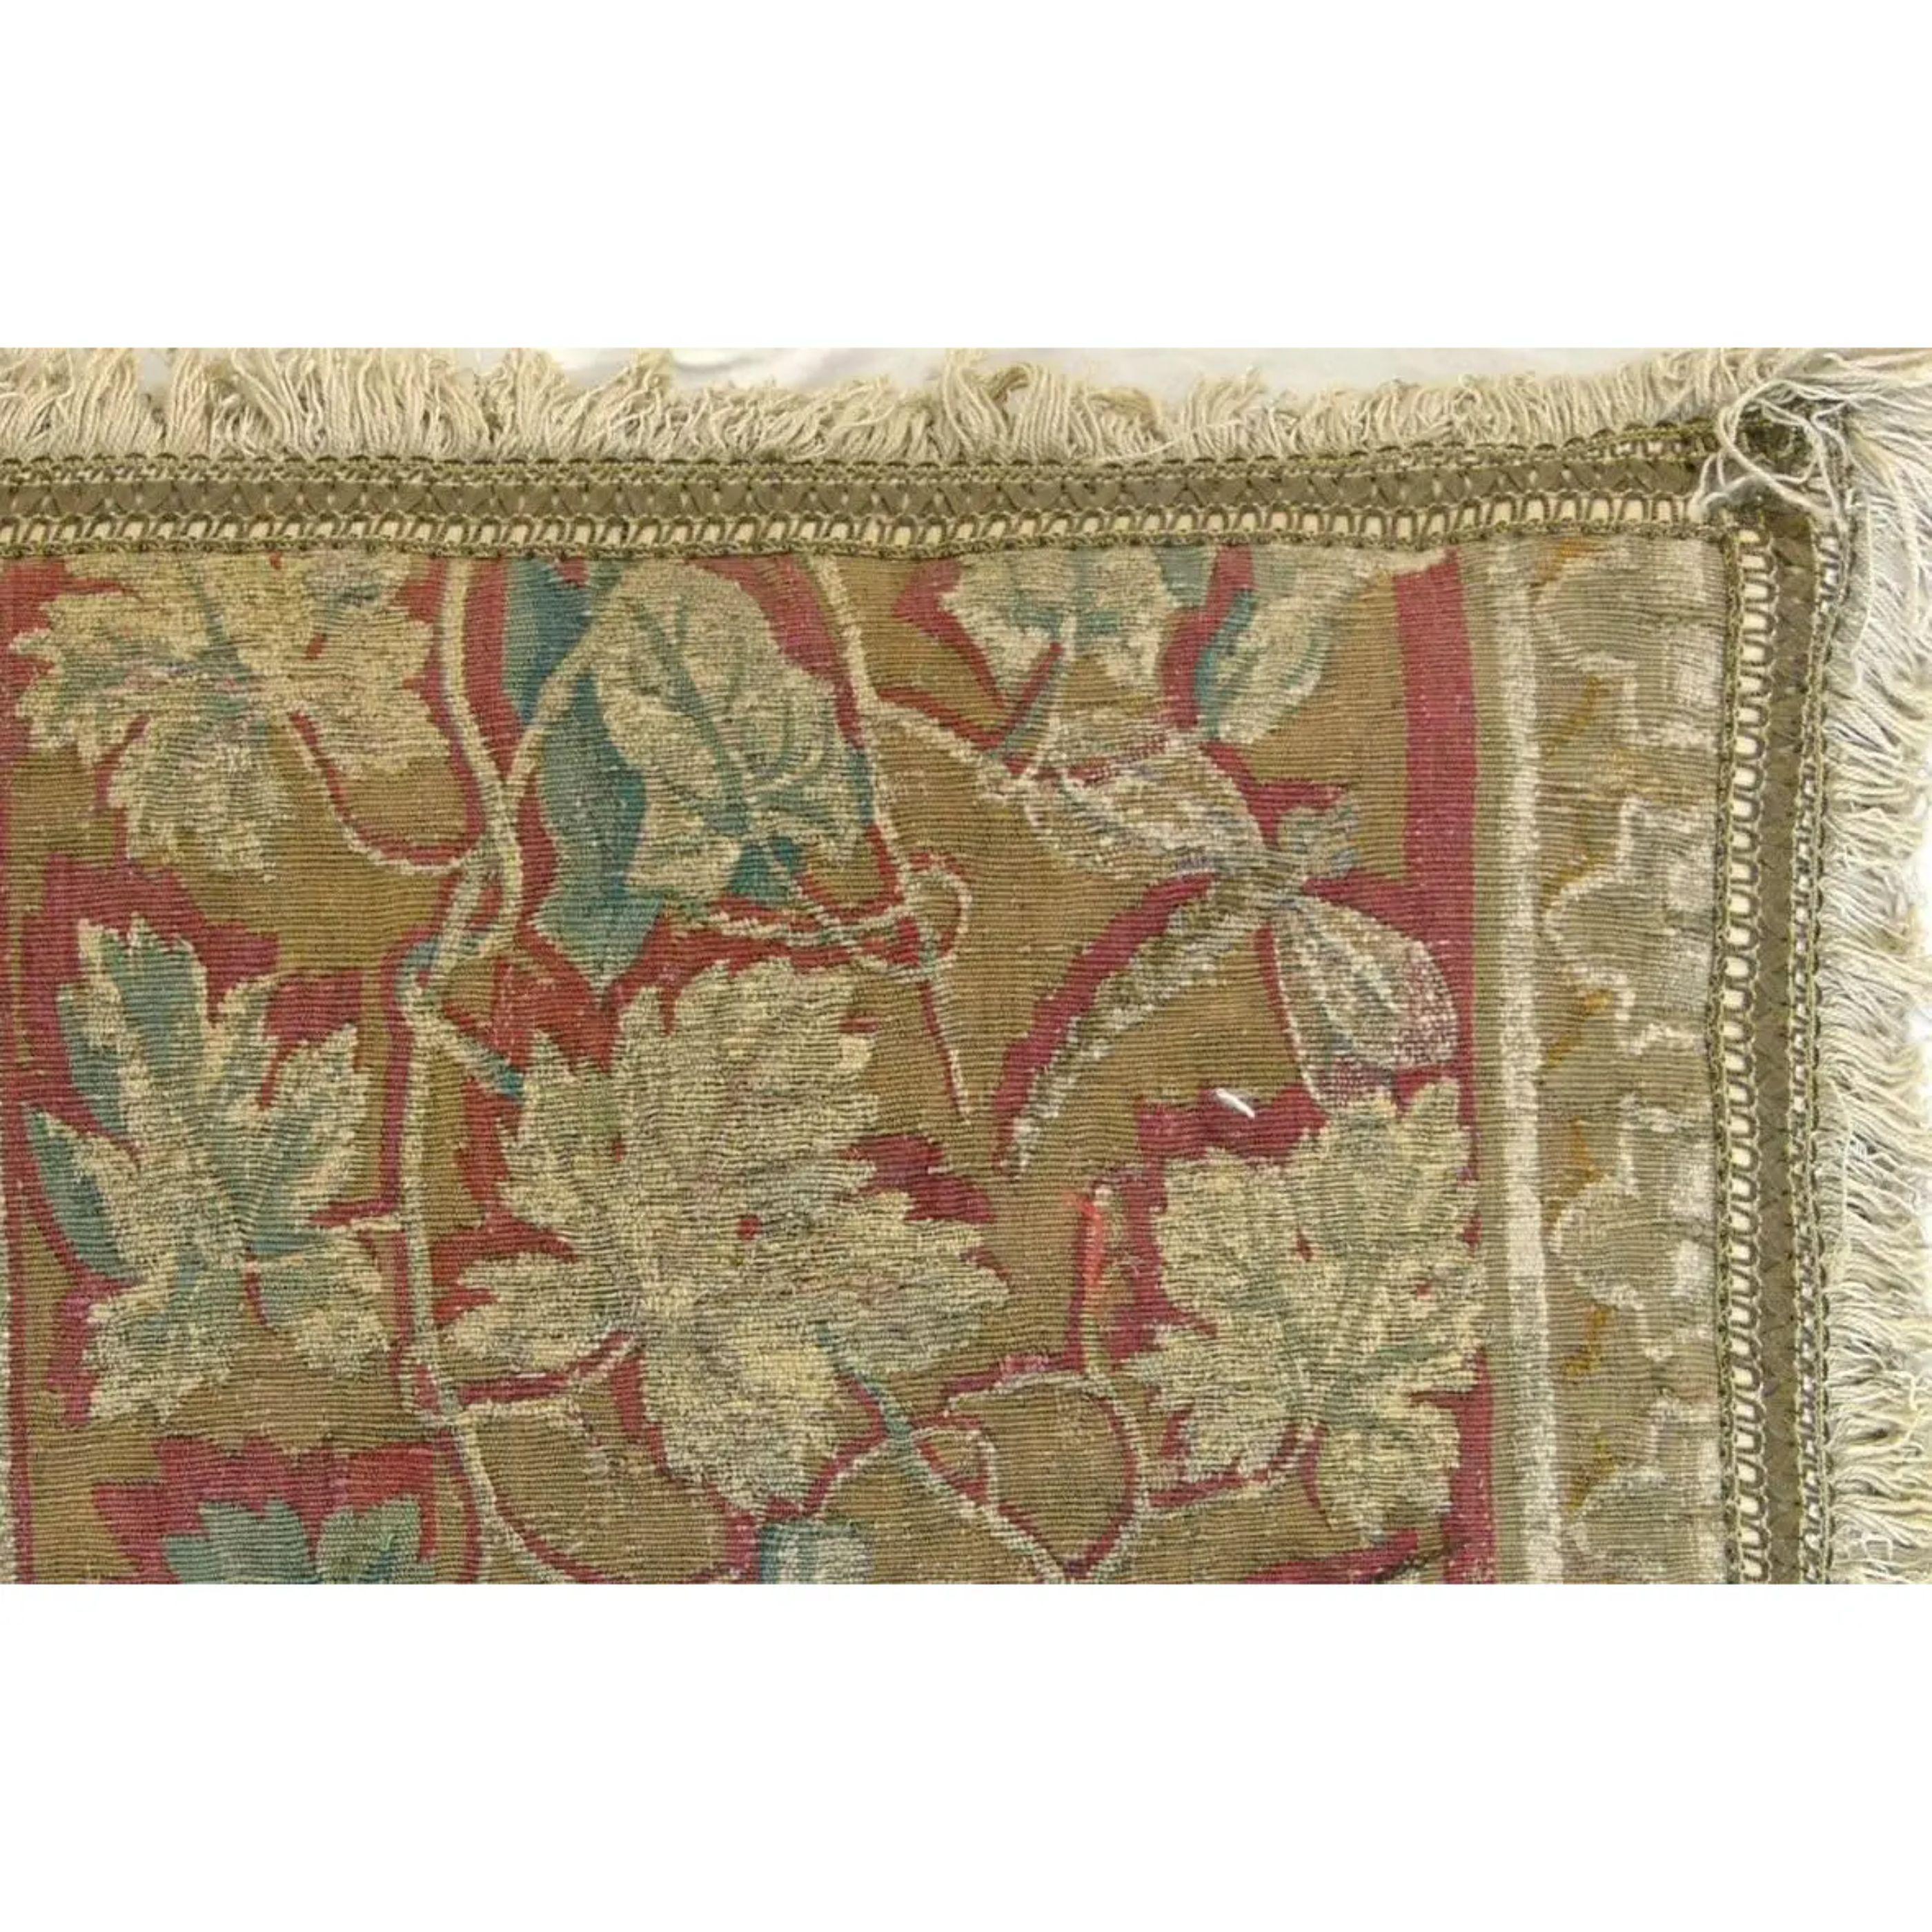 Antique 17th century Brussels tapestry pillow. 20'' x 16'' x 6''.